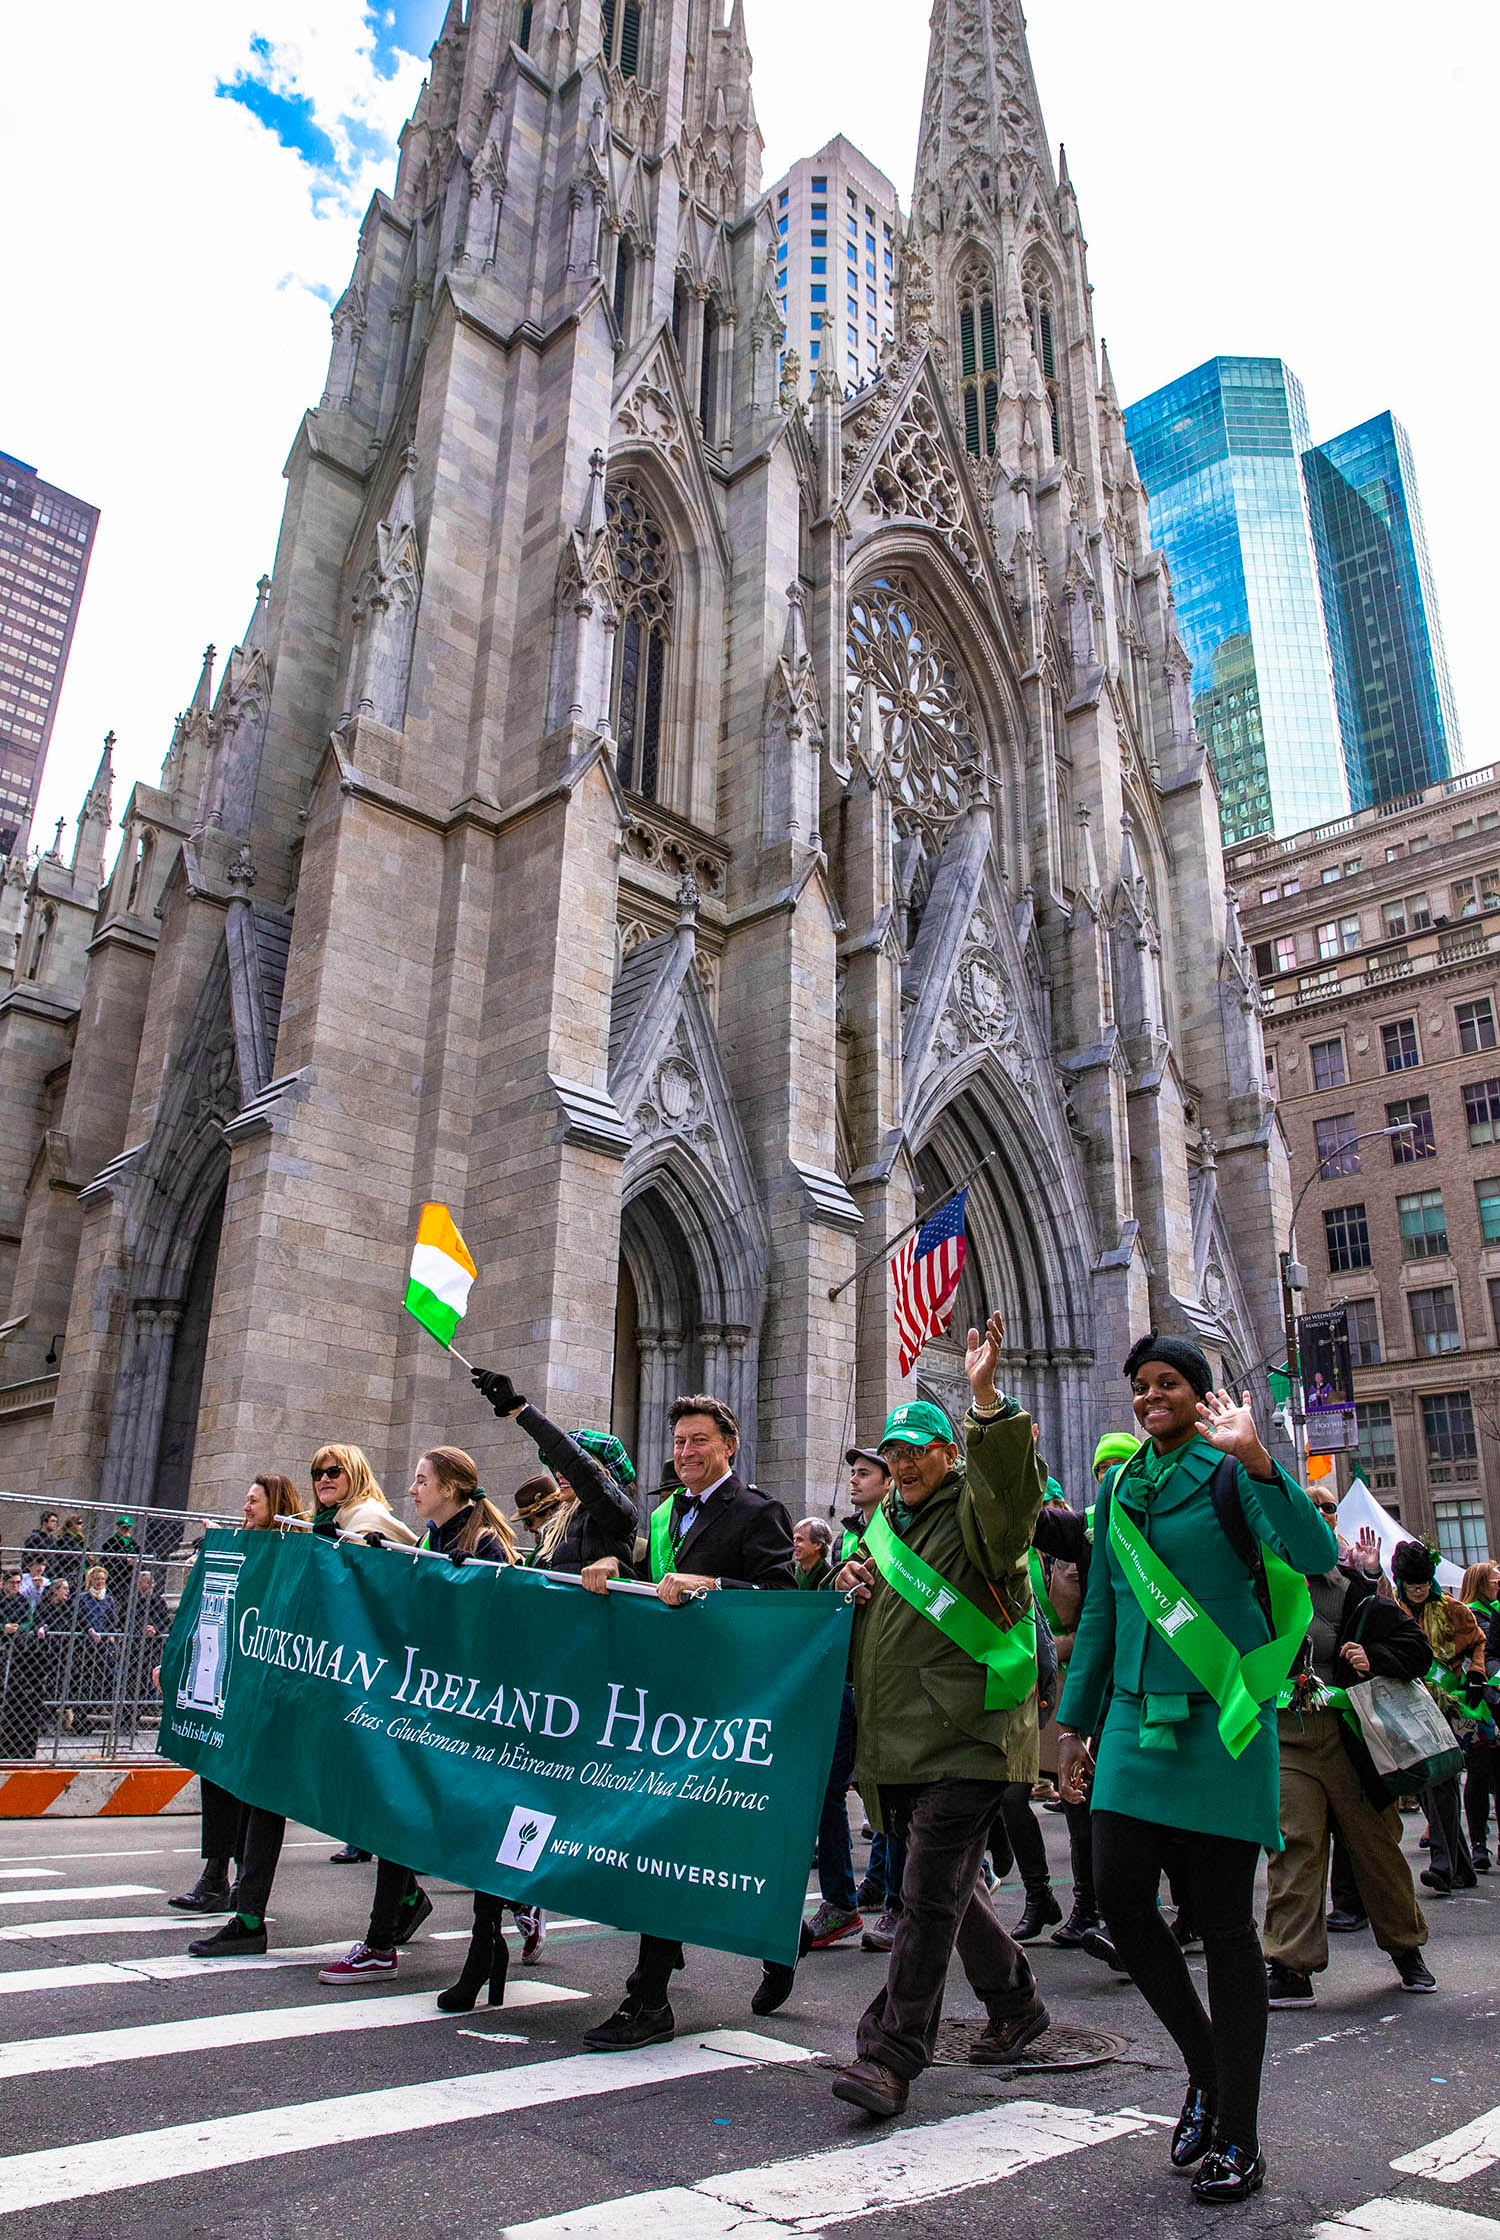 Saint Patrick's Day Parade in New York City © James Felder - licence [CC BY 2.0] from Wikimedia Commons